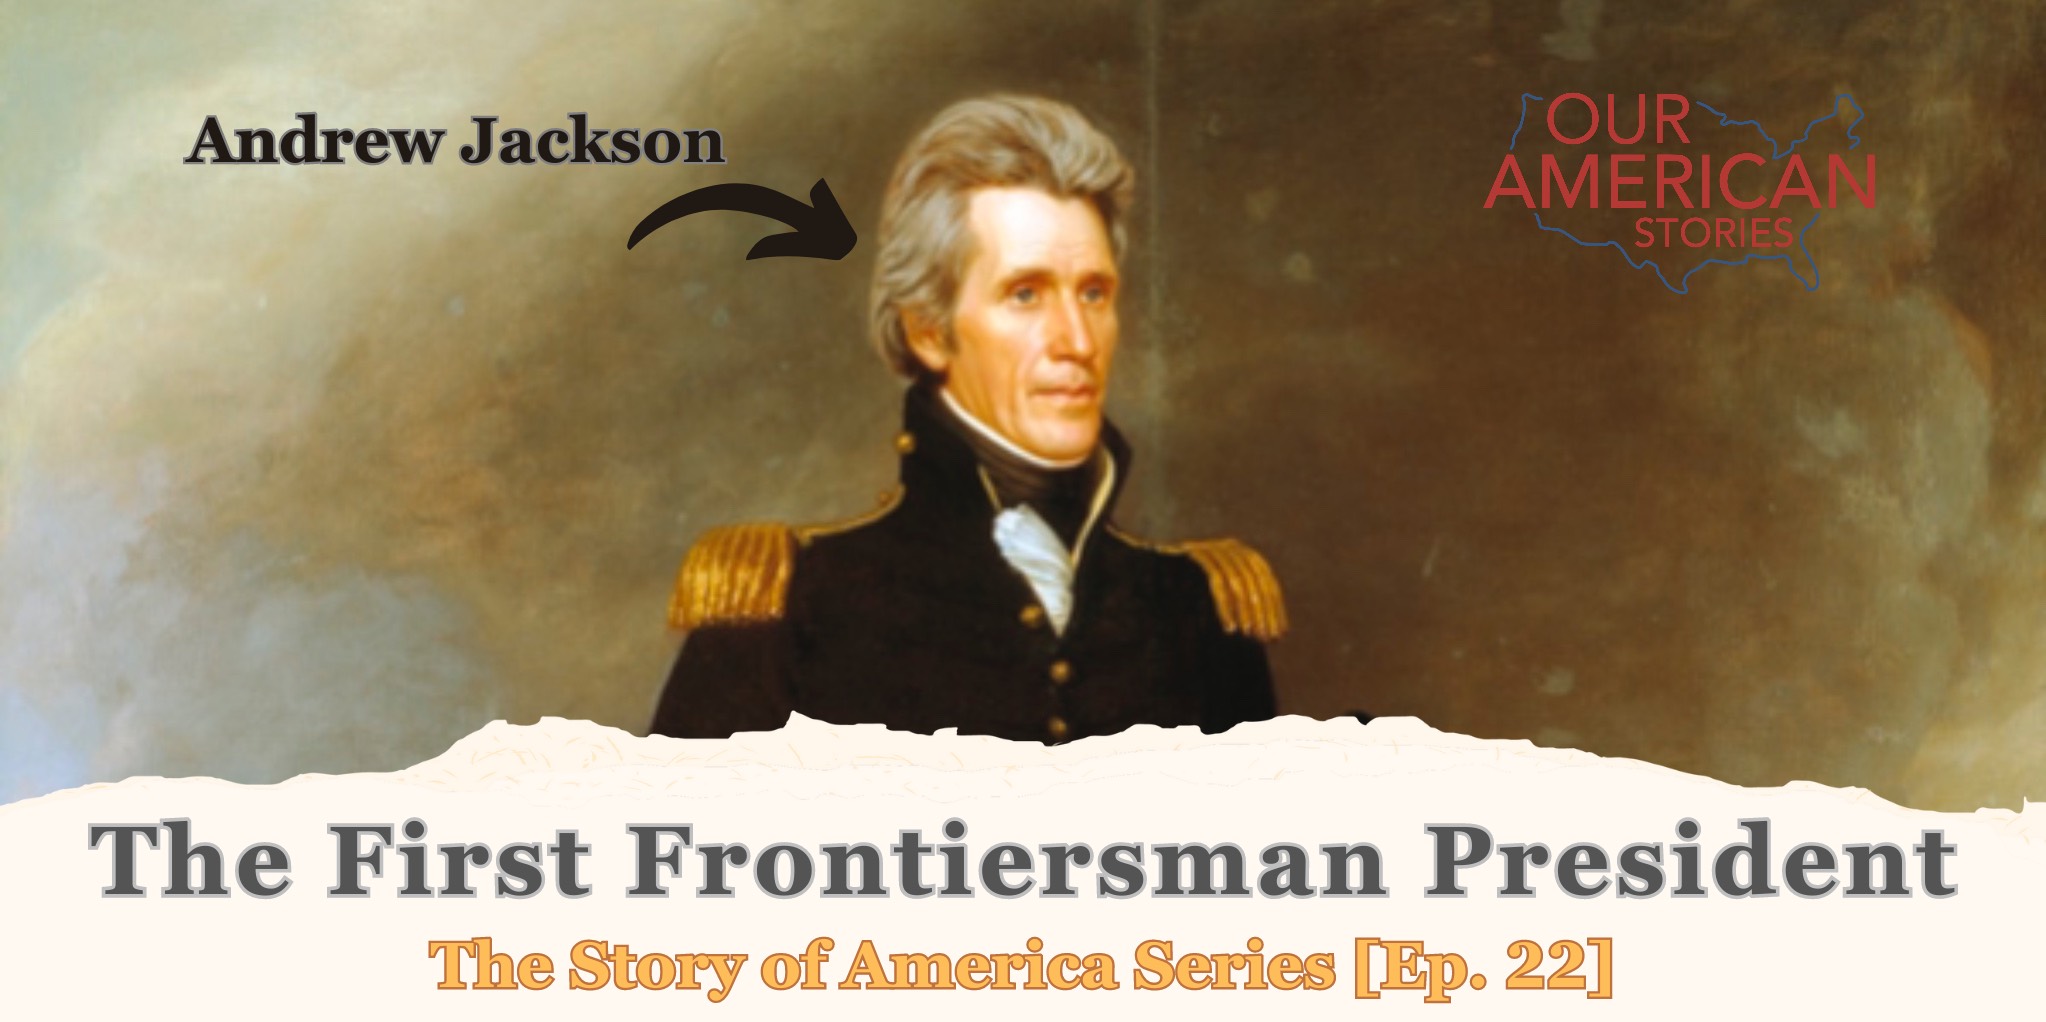 The First Frontiersman President—Andrew Jackson: The Story of America Series [Ep. 22]